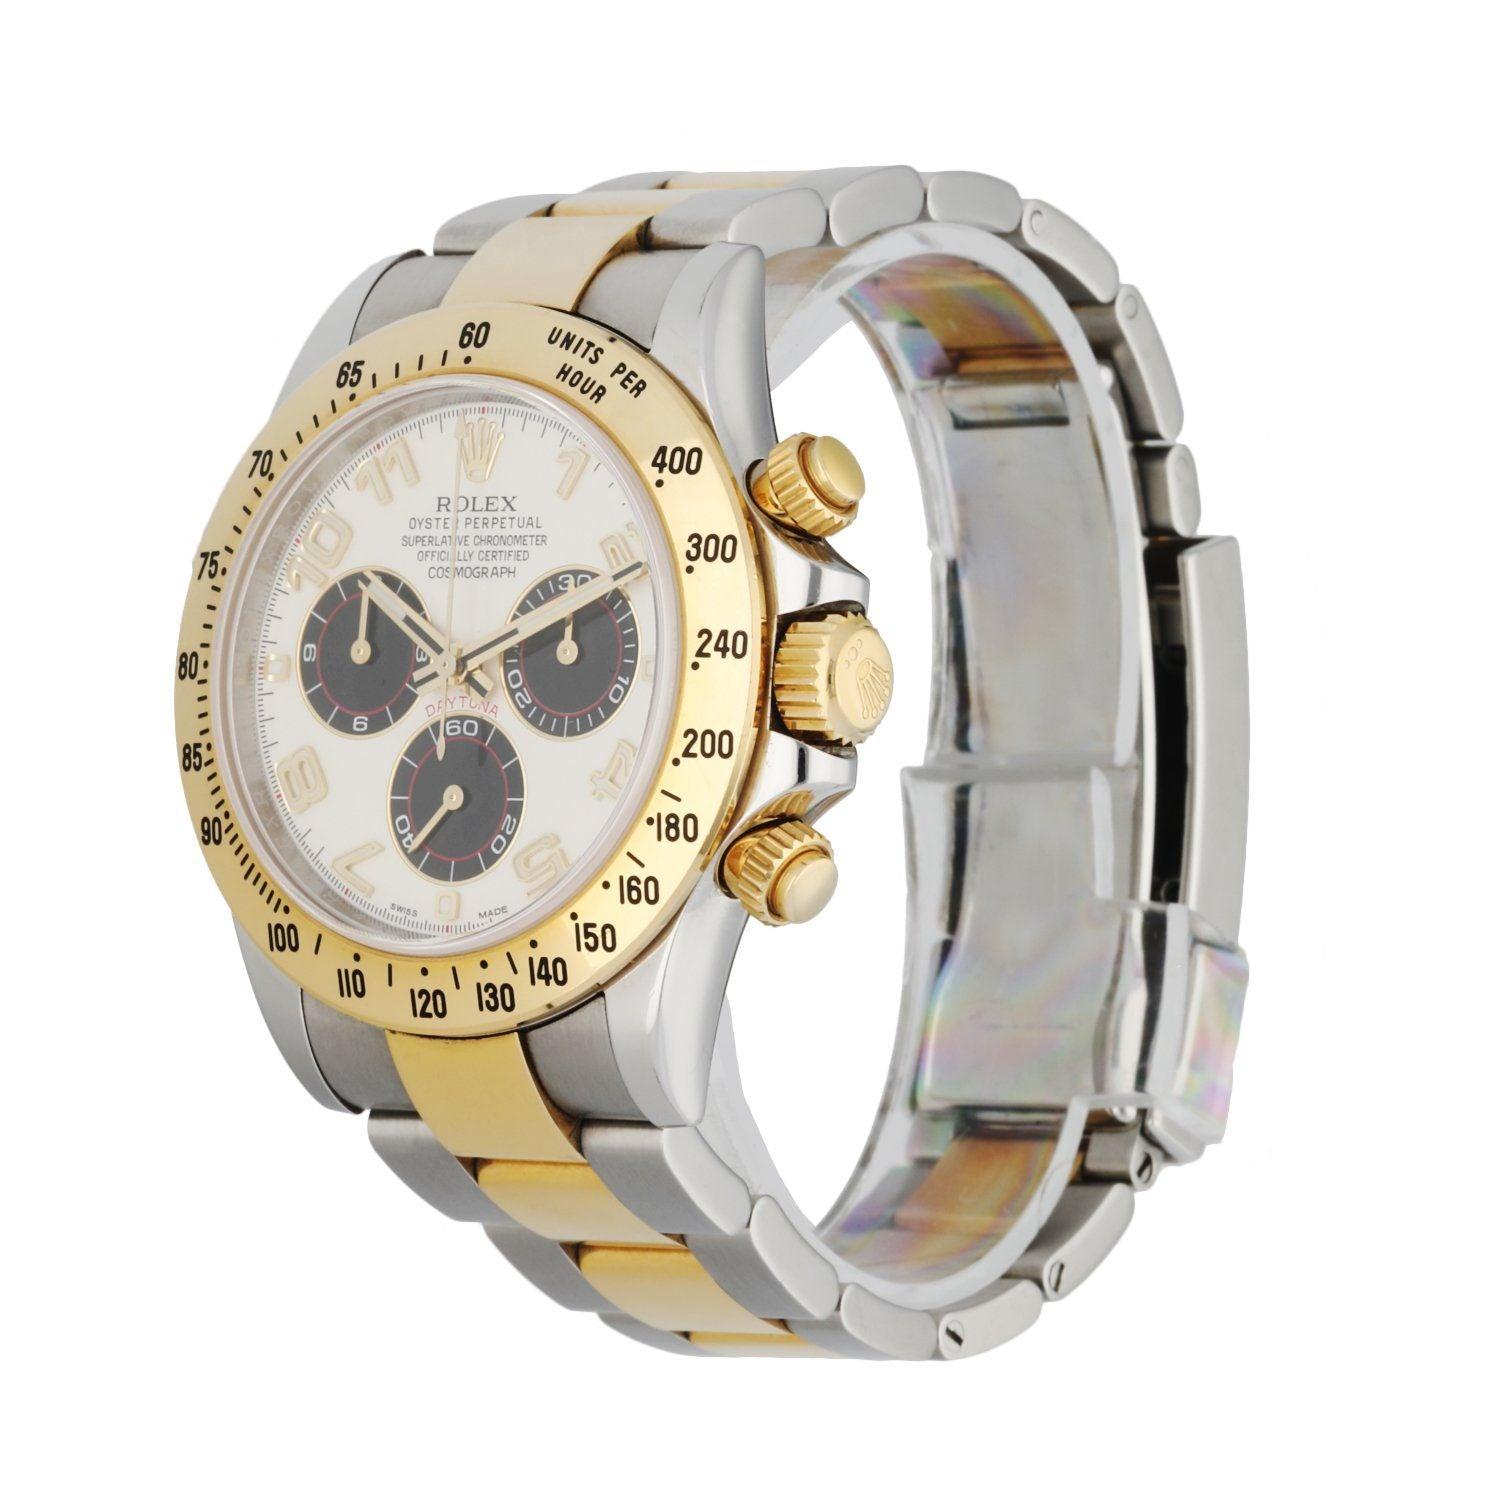 Rolex Oyster Perpetual Daytona 116523. 40mm Stainless steel case with 18k yellow gold bezel with tachymeter bezel insert. White dial with luminous gold hands and Arabic numeral hour markers. Black sub dial features: 30 minute, 12 hour, and 60